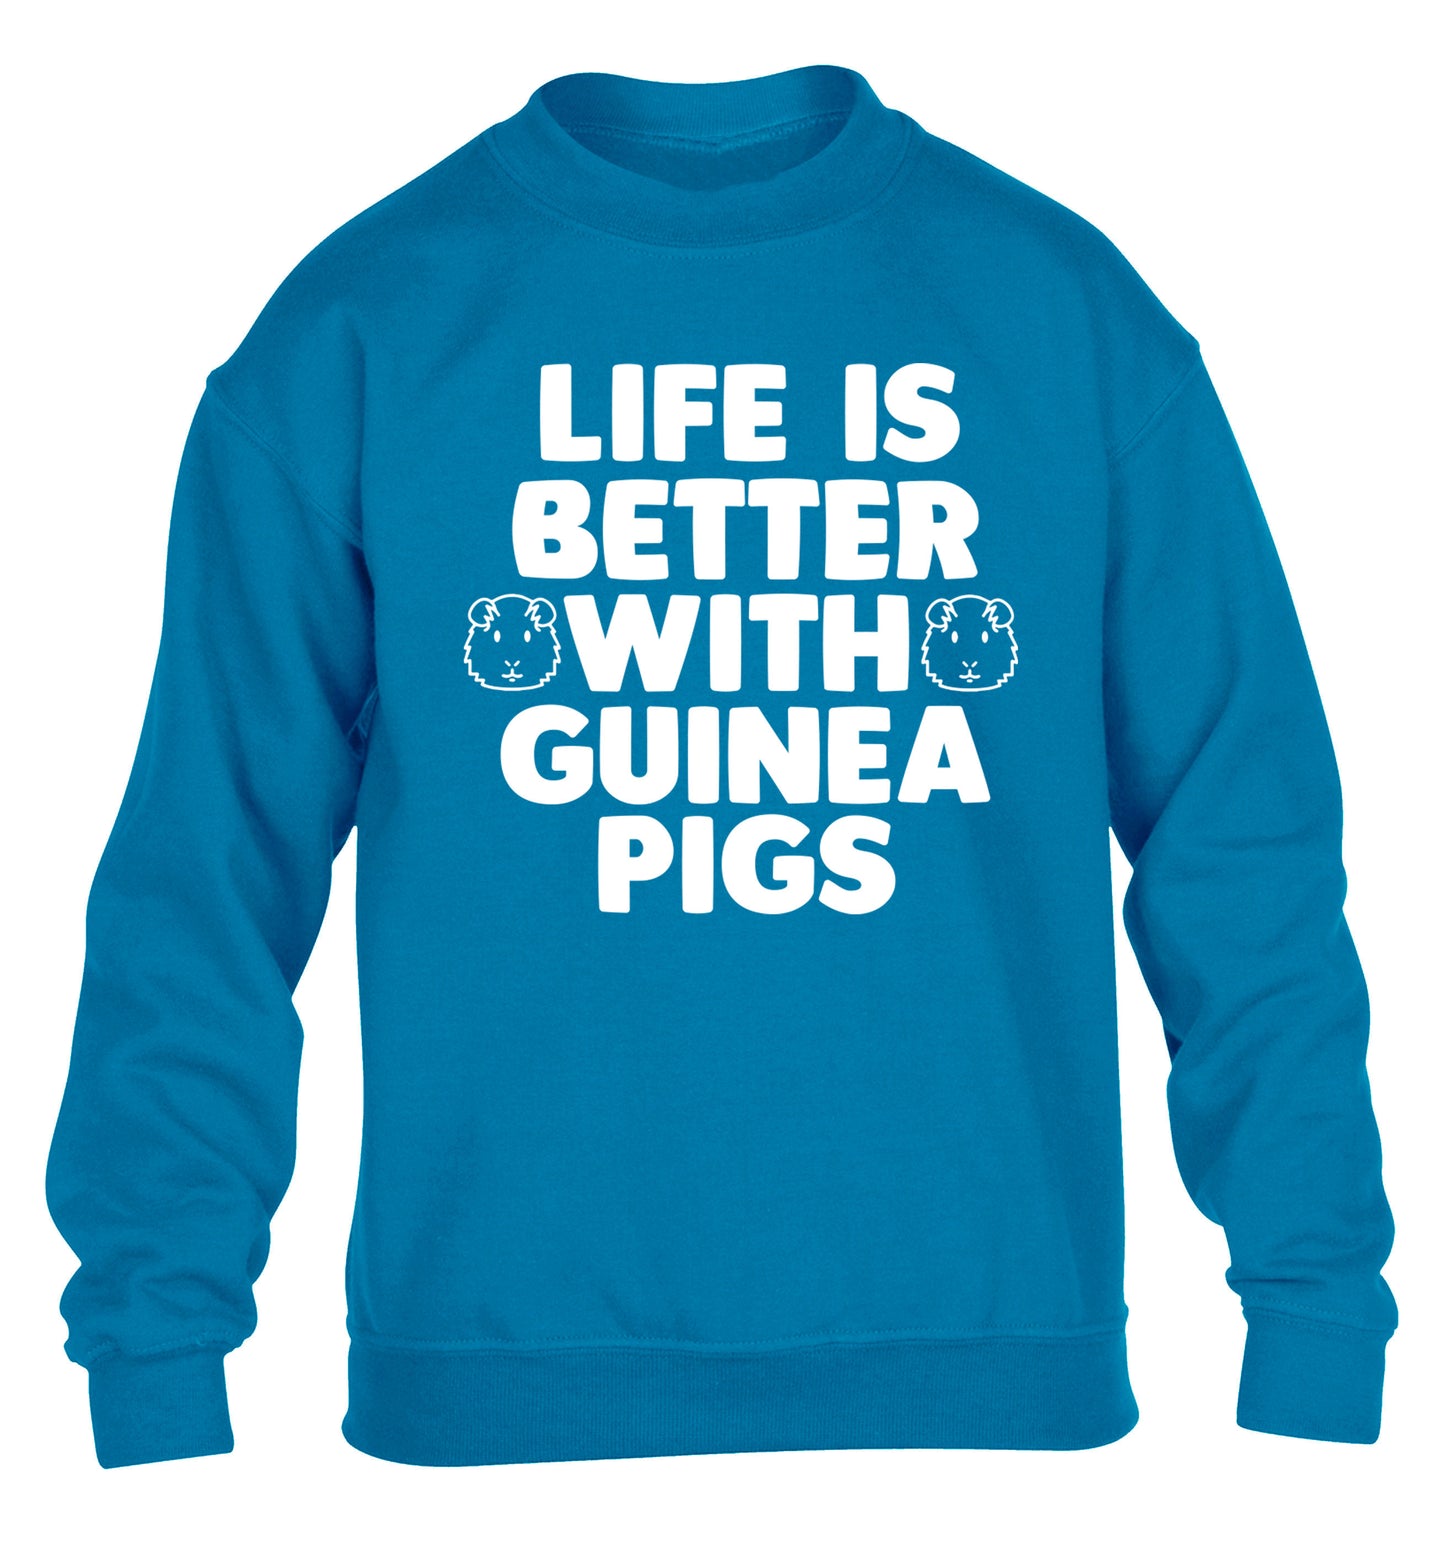 Life is better with guinea pigs children's blue  sweater 12-14 Years